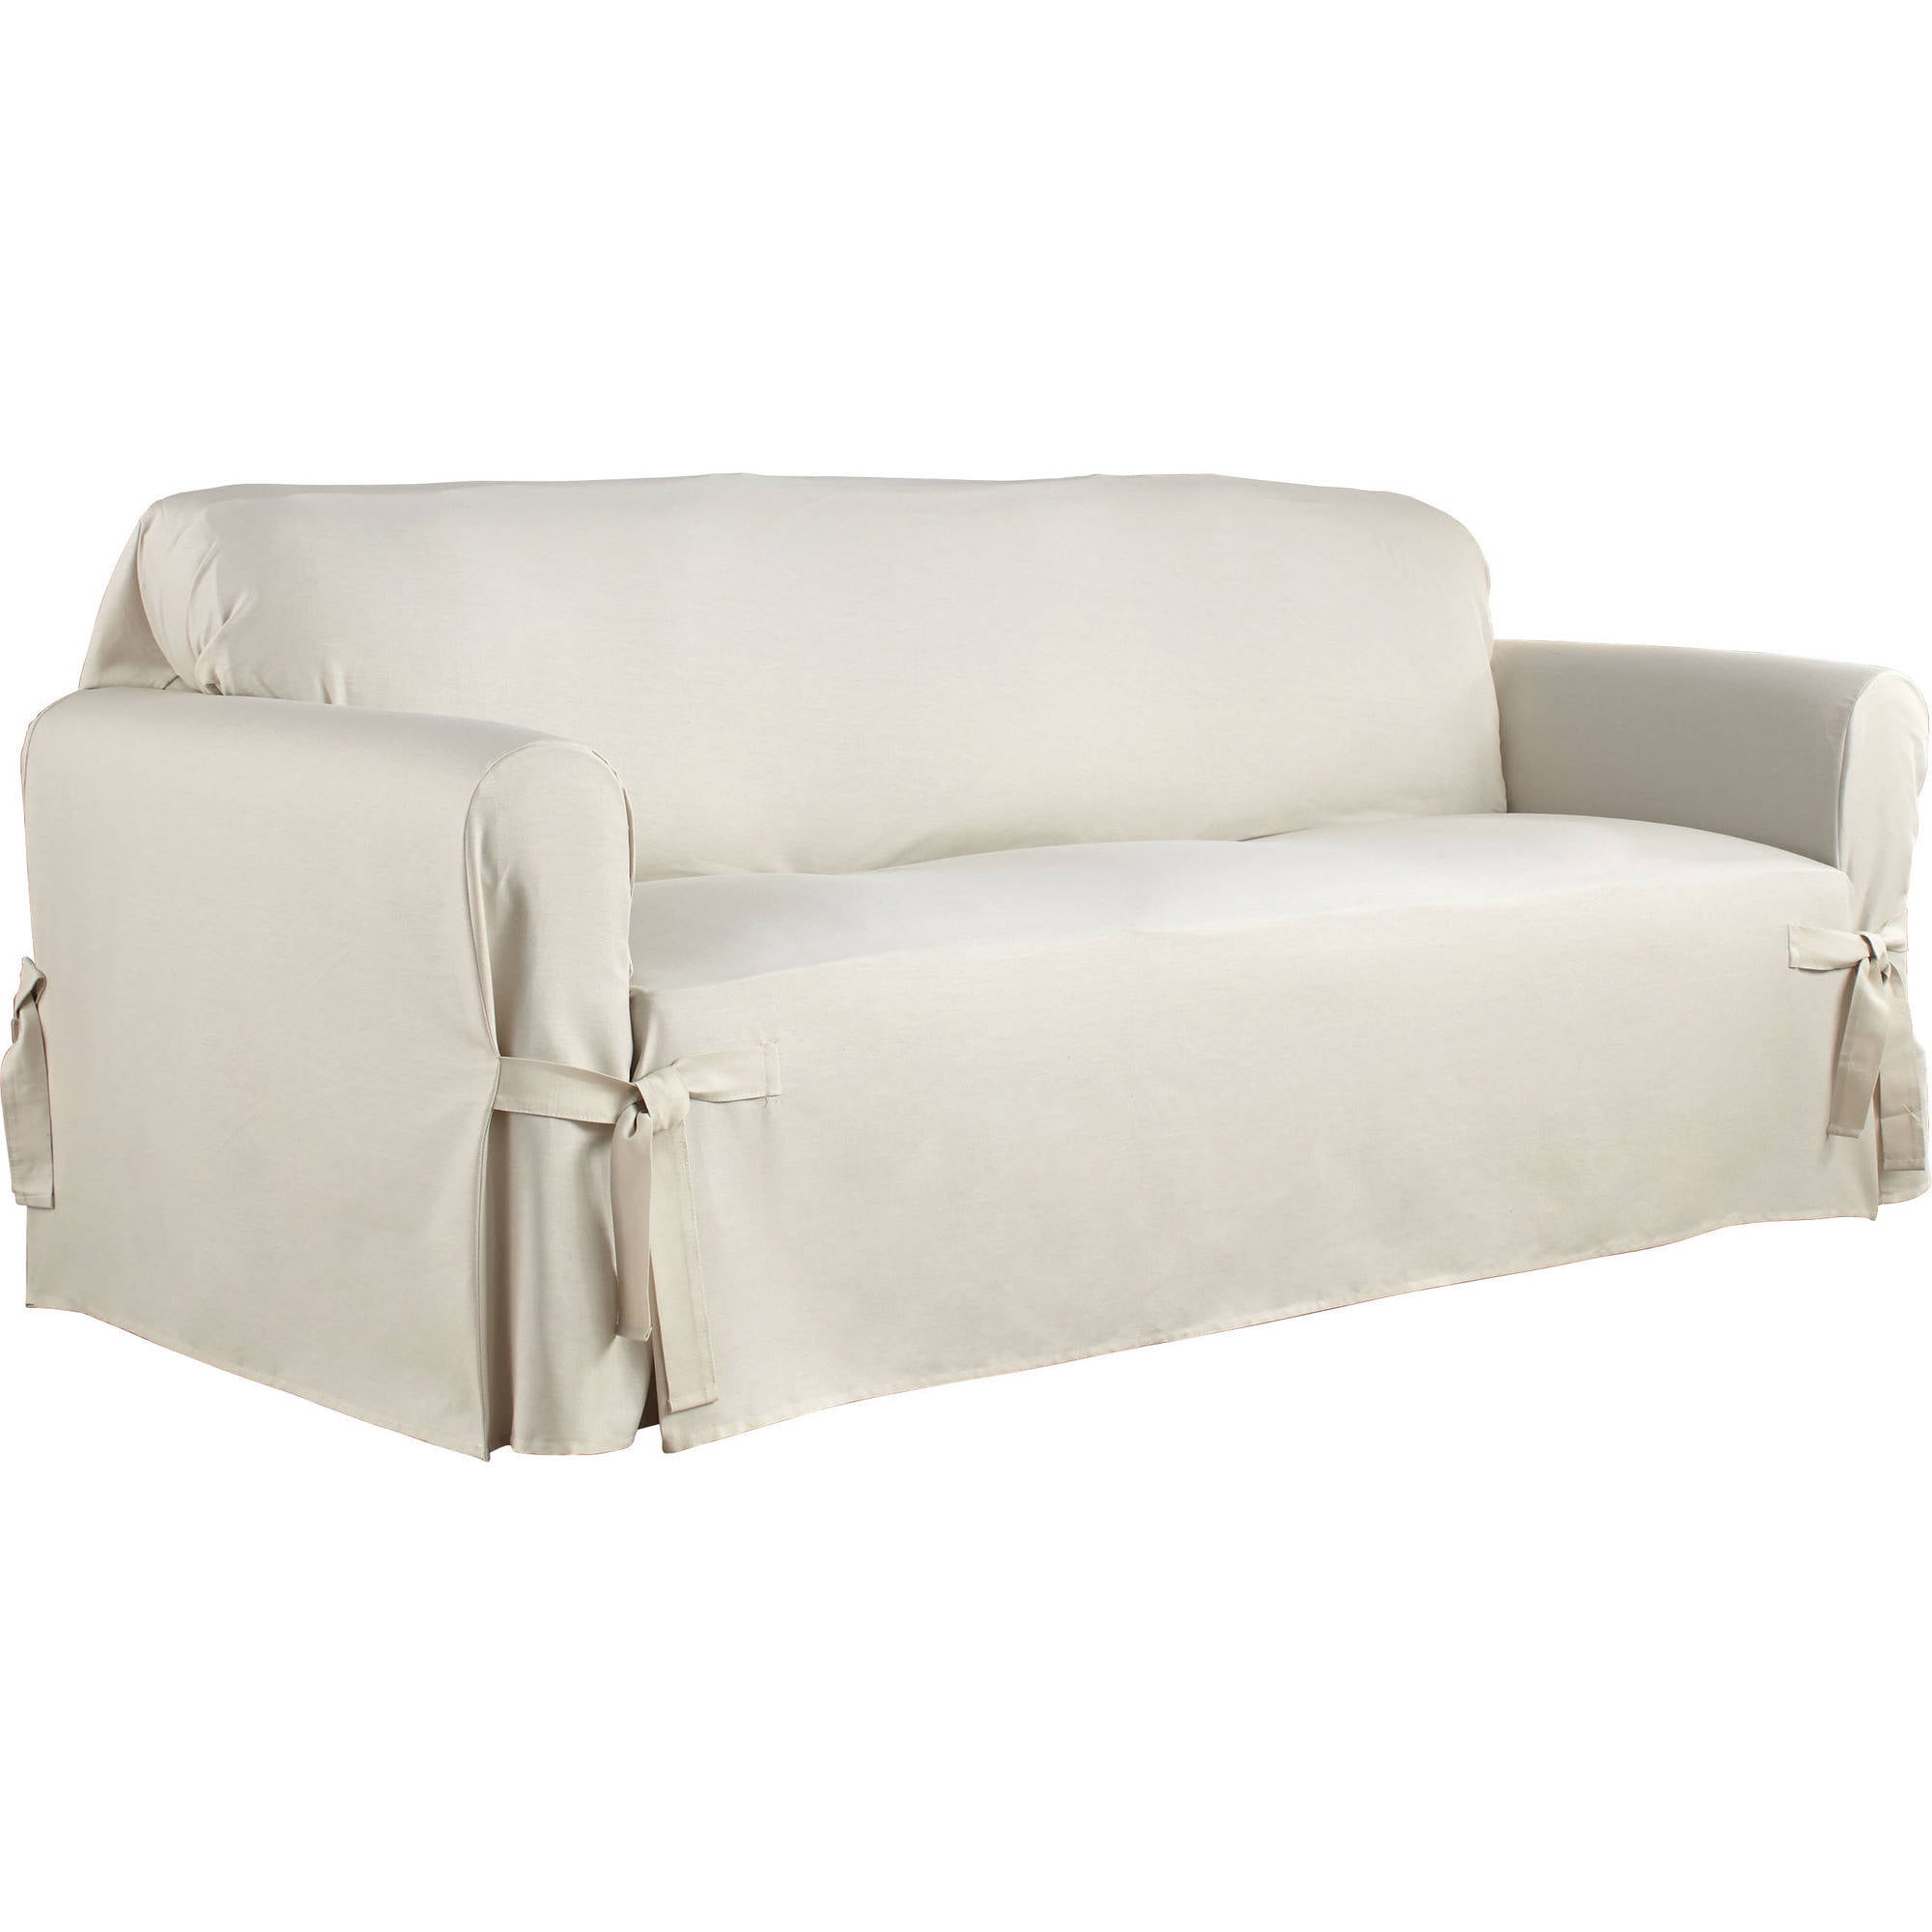 Serta Relaxed Fit Duck Furniture Slipcover Sofa 1-Piece T Cushion Natural 